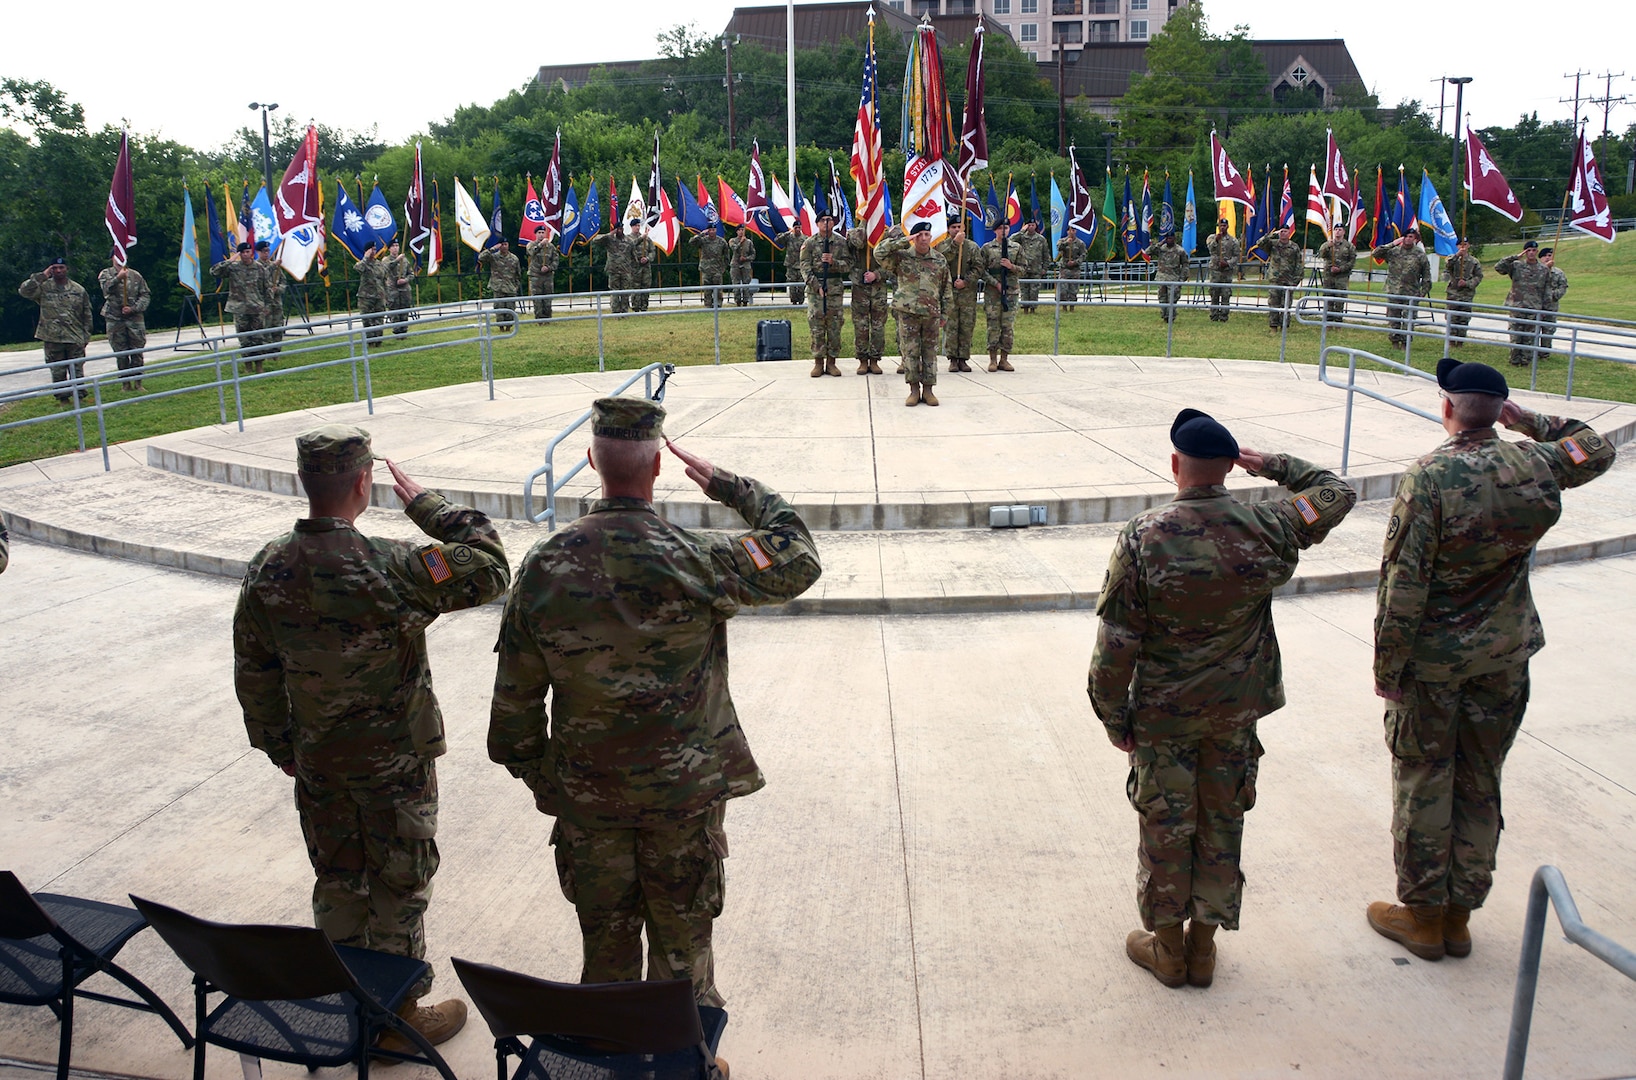 Members of the Regional Health Command-Central command team salute the American flag during the National Anthem during an assumption of responsibility ceremony at the U.S. Army Medical Museum Amphitheatre at Joint Base San Antonio-Fort Sam Houston Aug. 6. From left are Lt. Col. Kenny Wells, Col. John Lamoureux, Command Sgt. Maj. Joseph Cecil and Brig. Gen. Jeffrey Johnson.